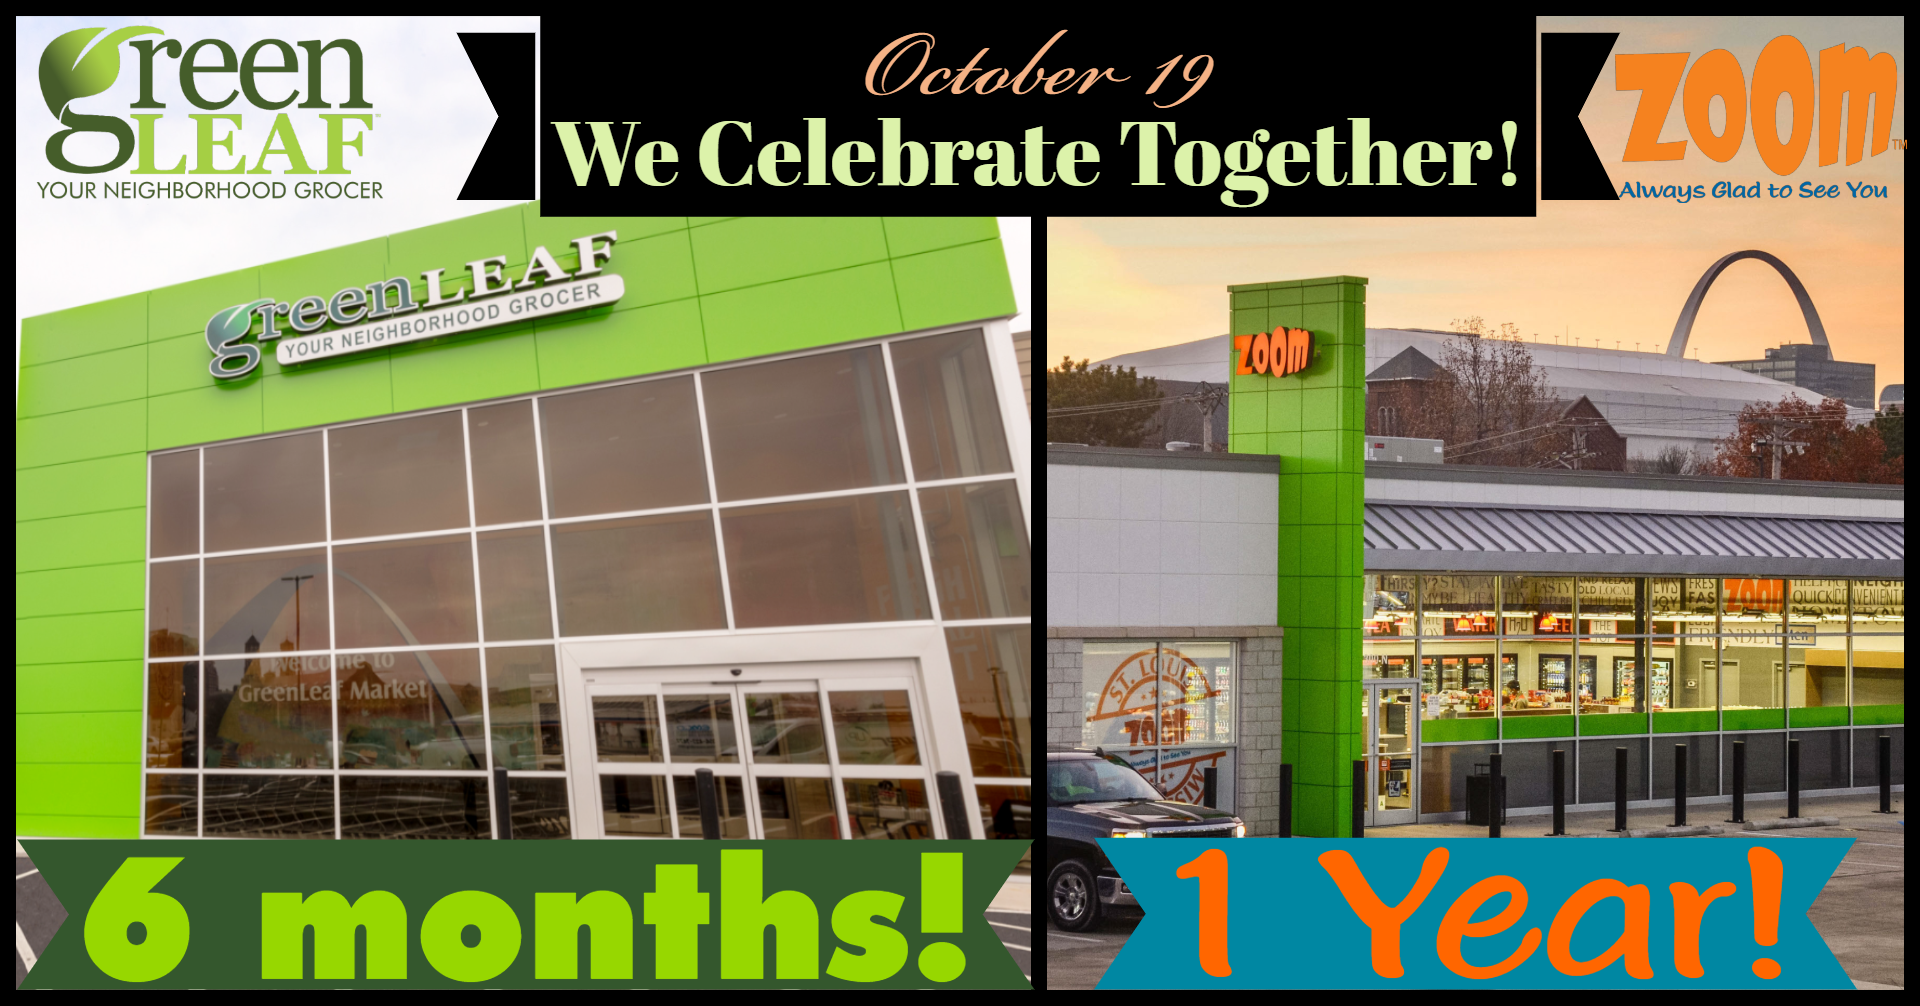 Zoom St. Louis celebrating 1 year October 19